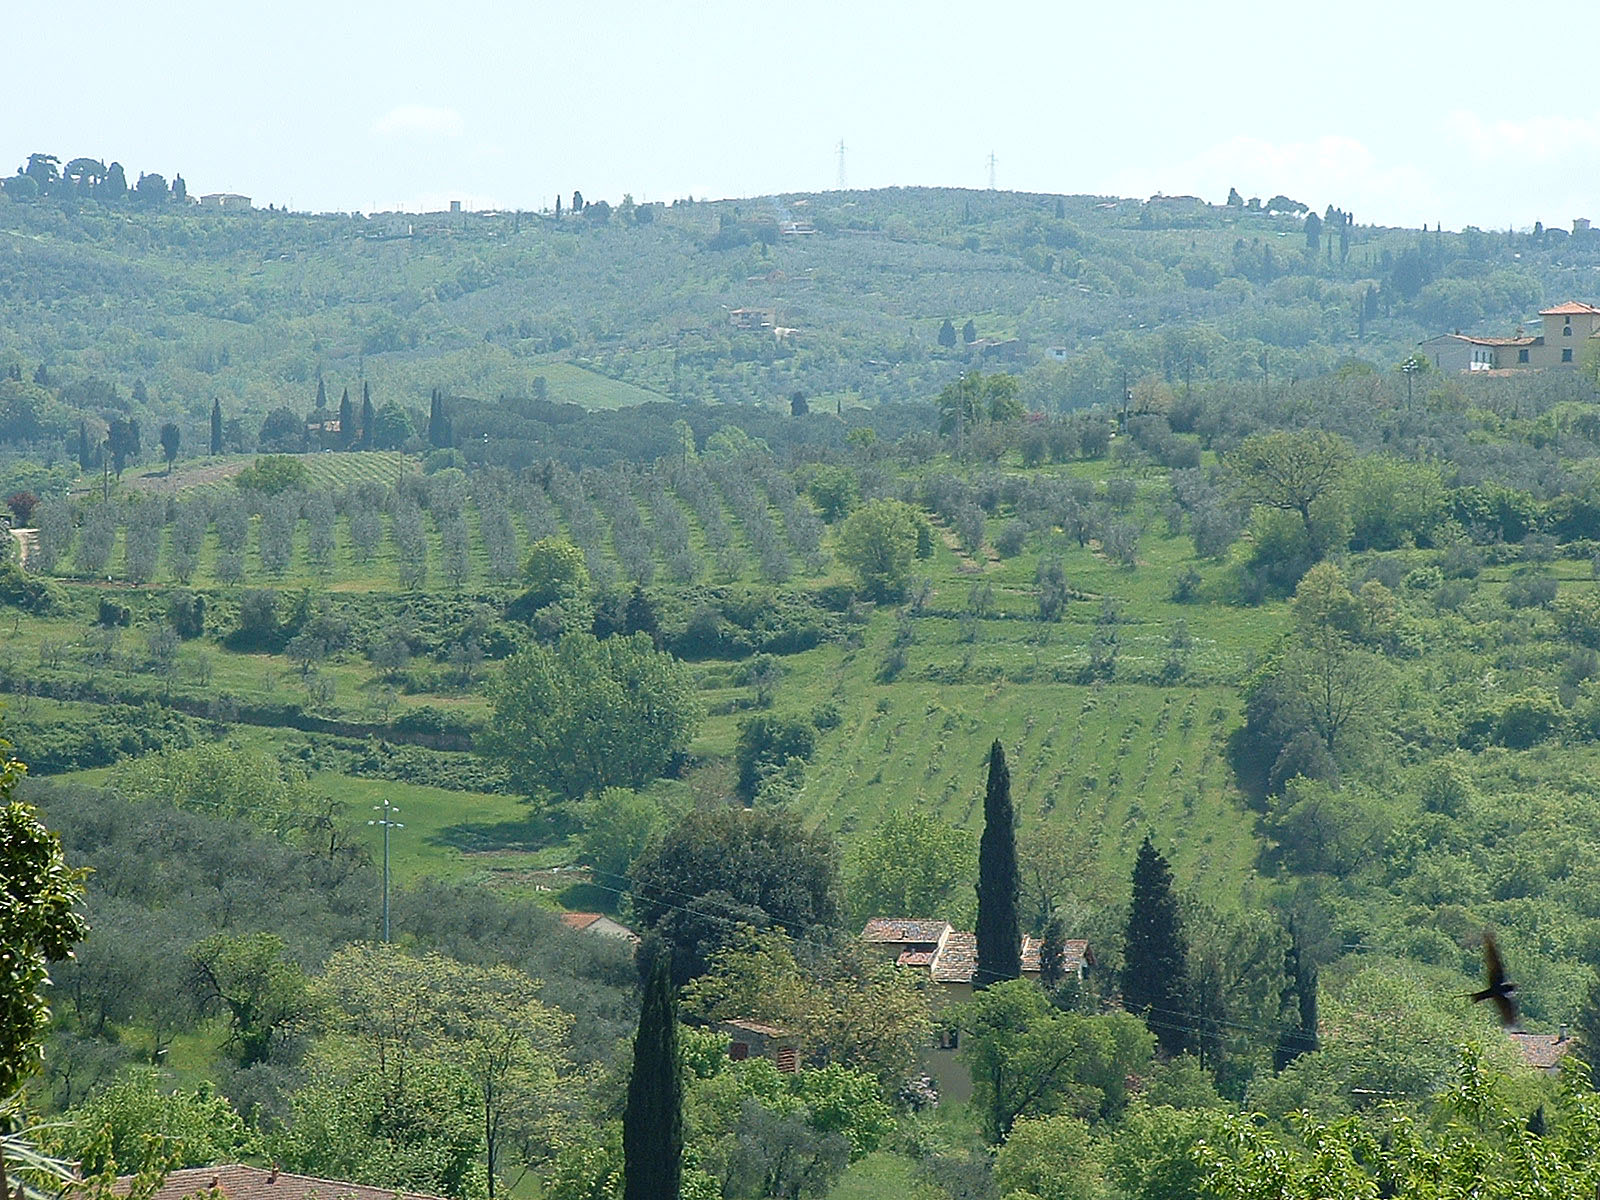 a view of some hills, with trees and buildings